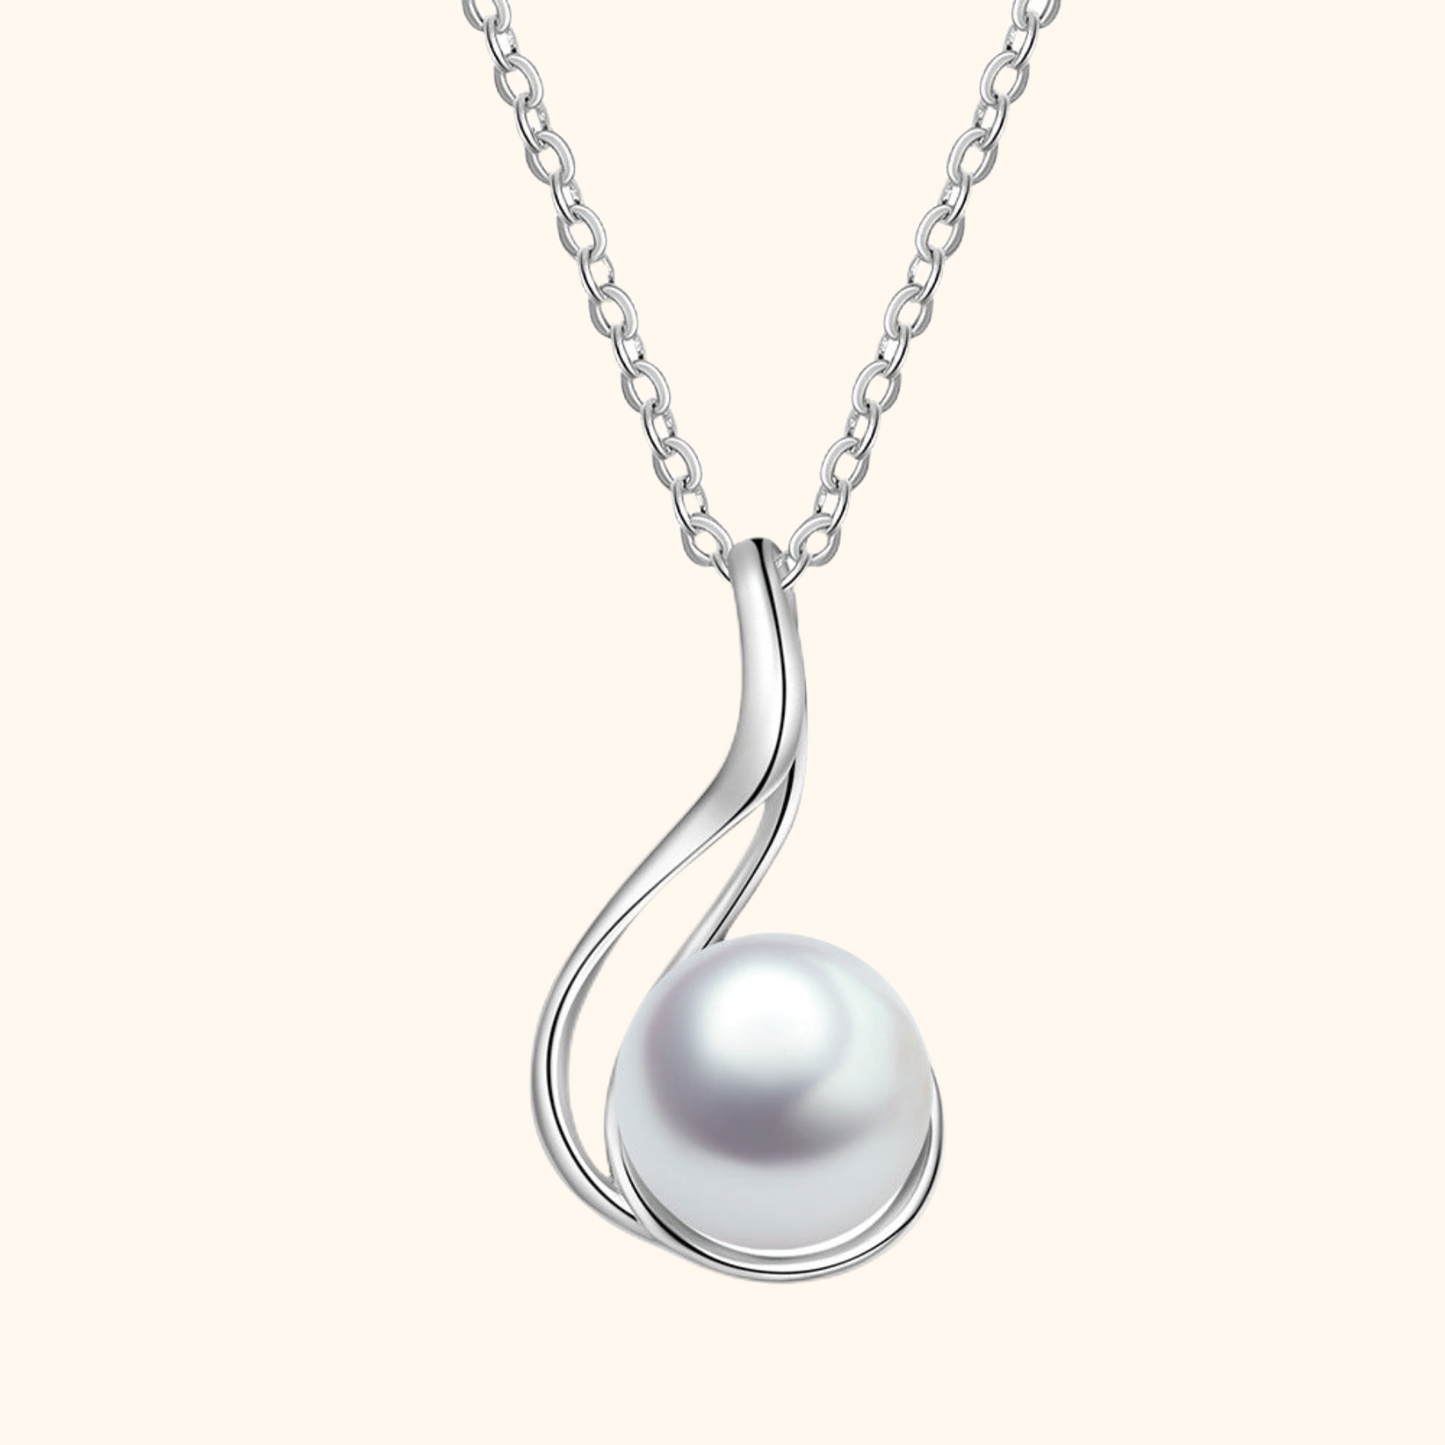 10mm Freshwater Pearl Pendant Necklace - S925 Silver